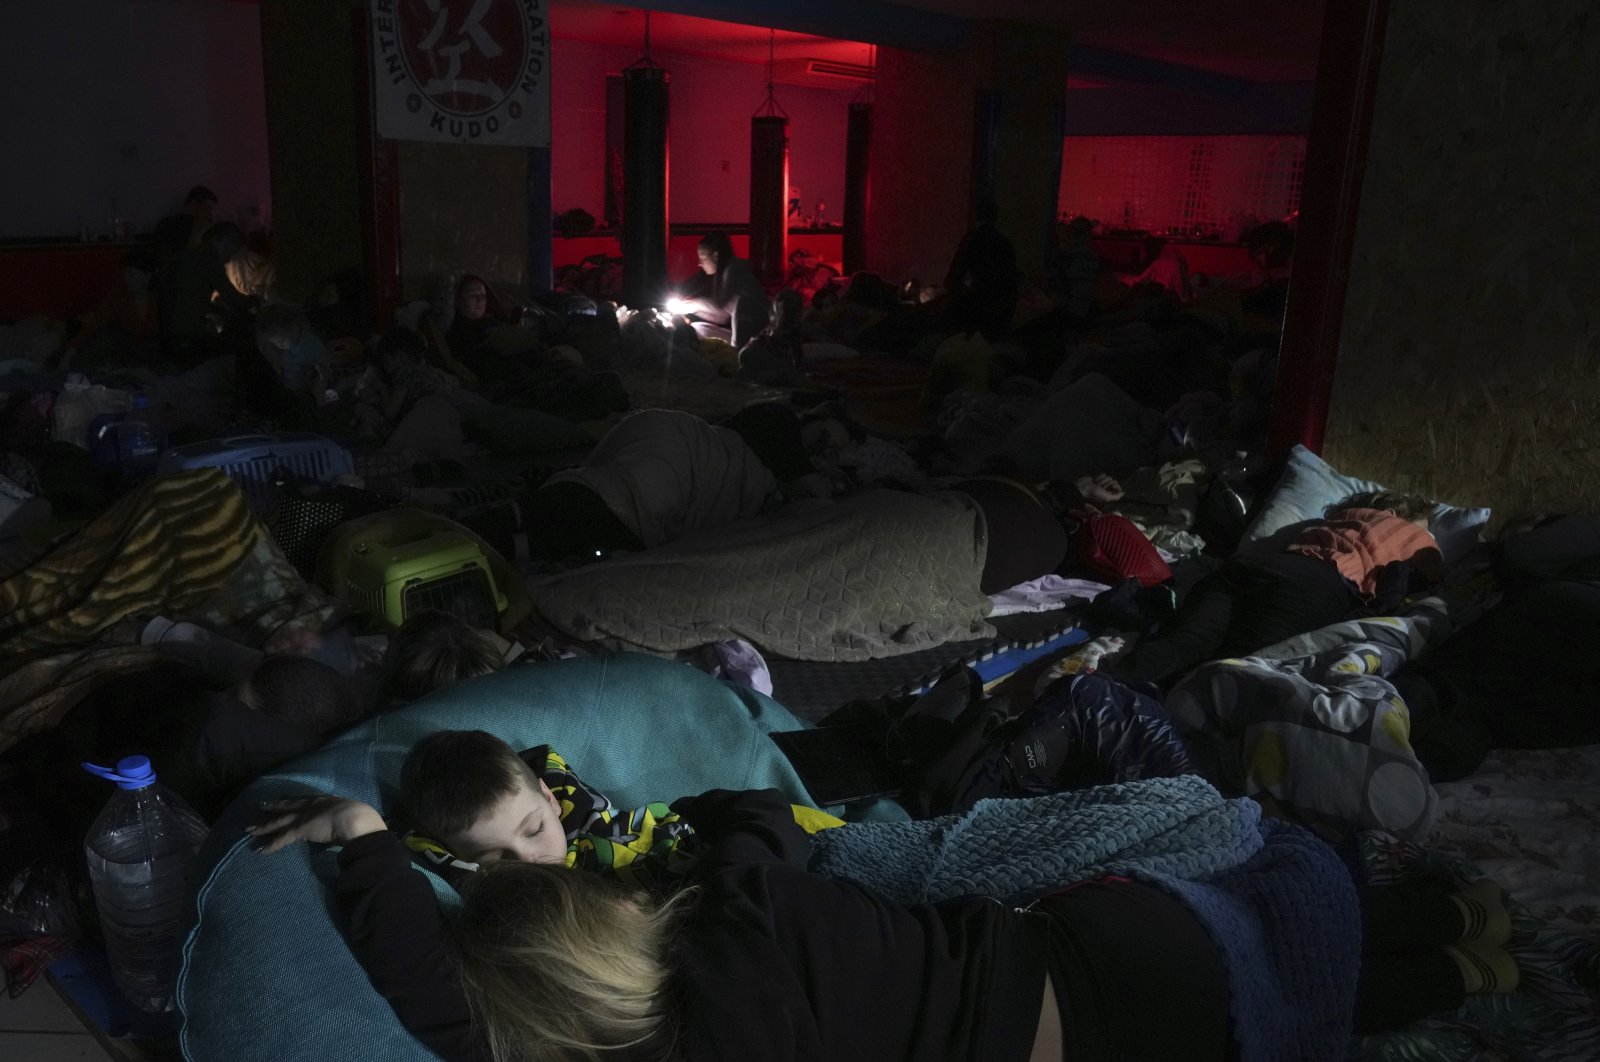 People sleep in the improvised bomb shelter in a sports center, which can accommodate up to 2,000 people, in Mariupol, Ukraine, Feb. 27, 2022. (AP Photo)